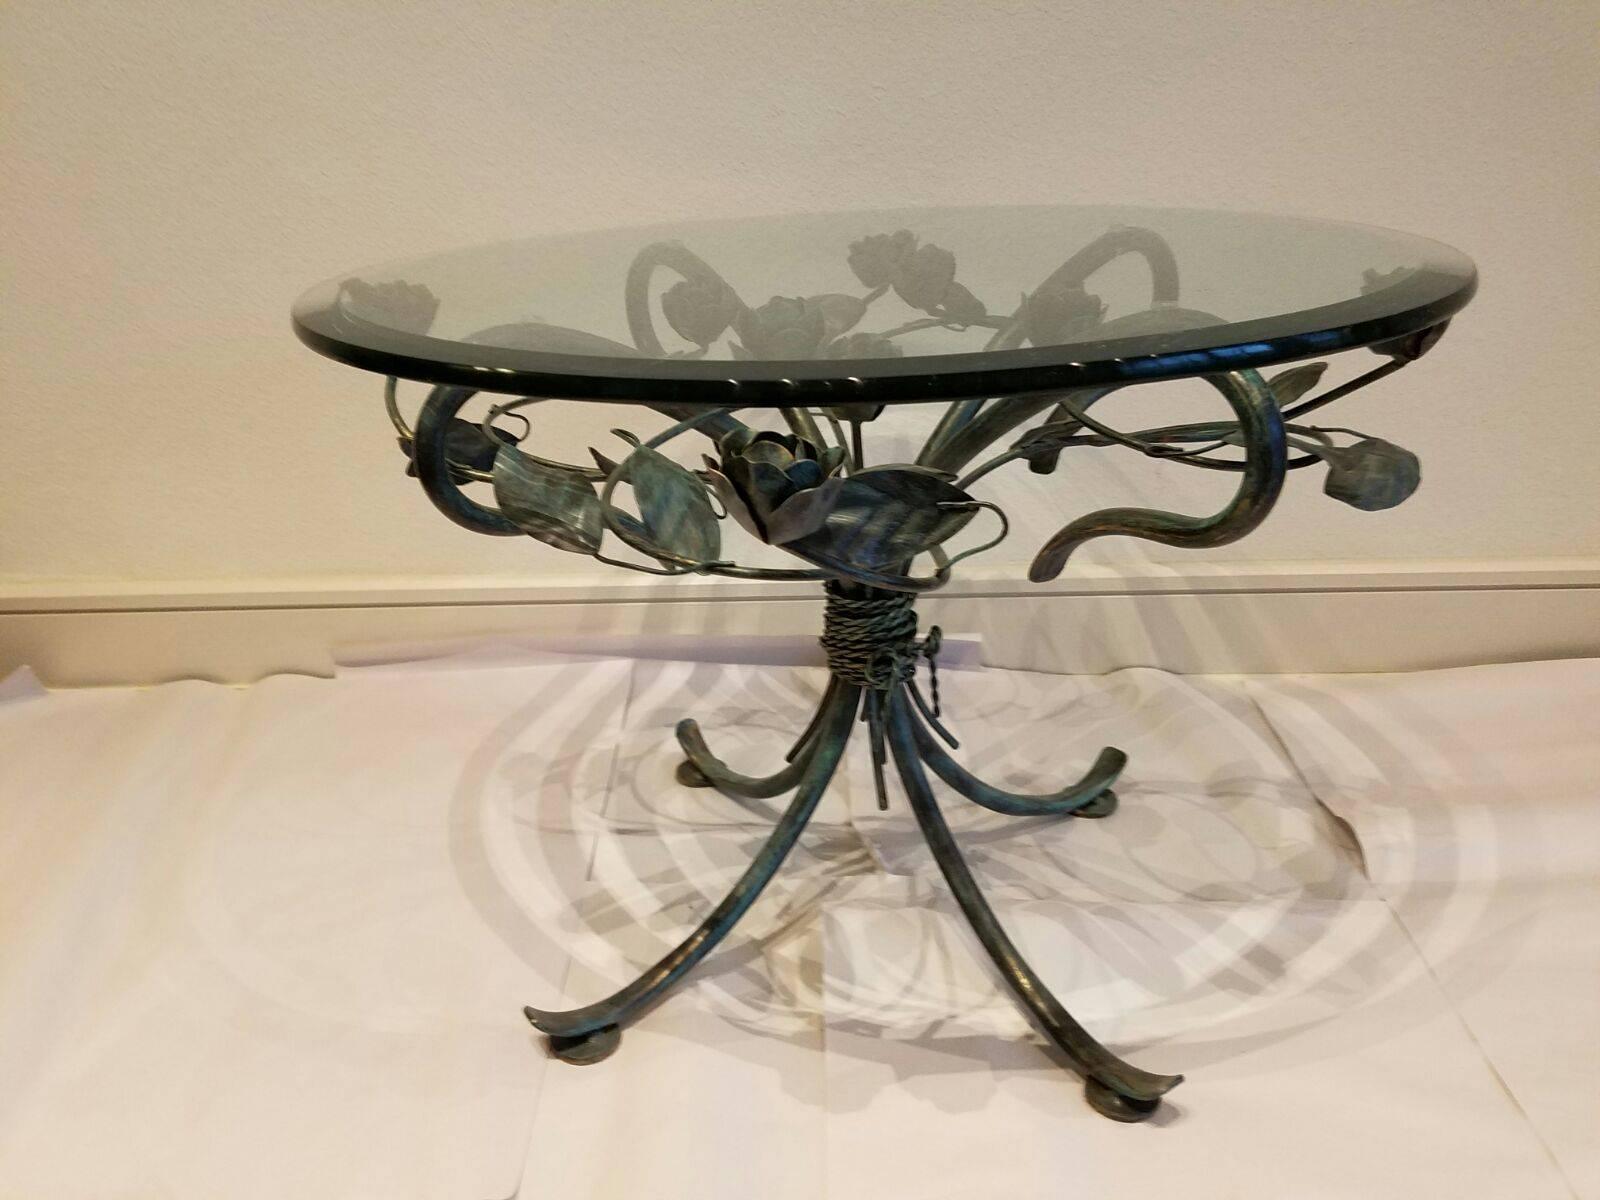 Hollywood Regency-style table with glass top. Made in Italy. Some scratches and wear. Made in the 1970s.